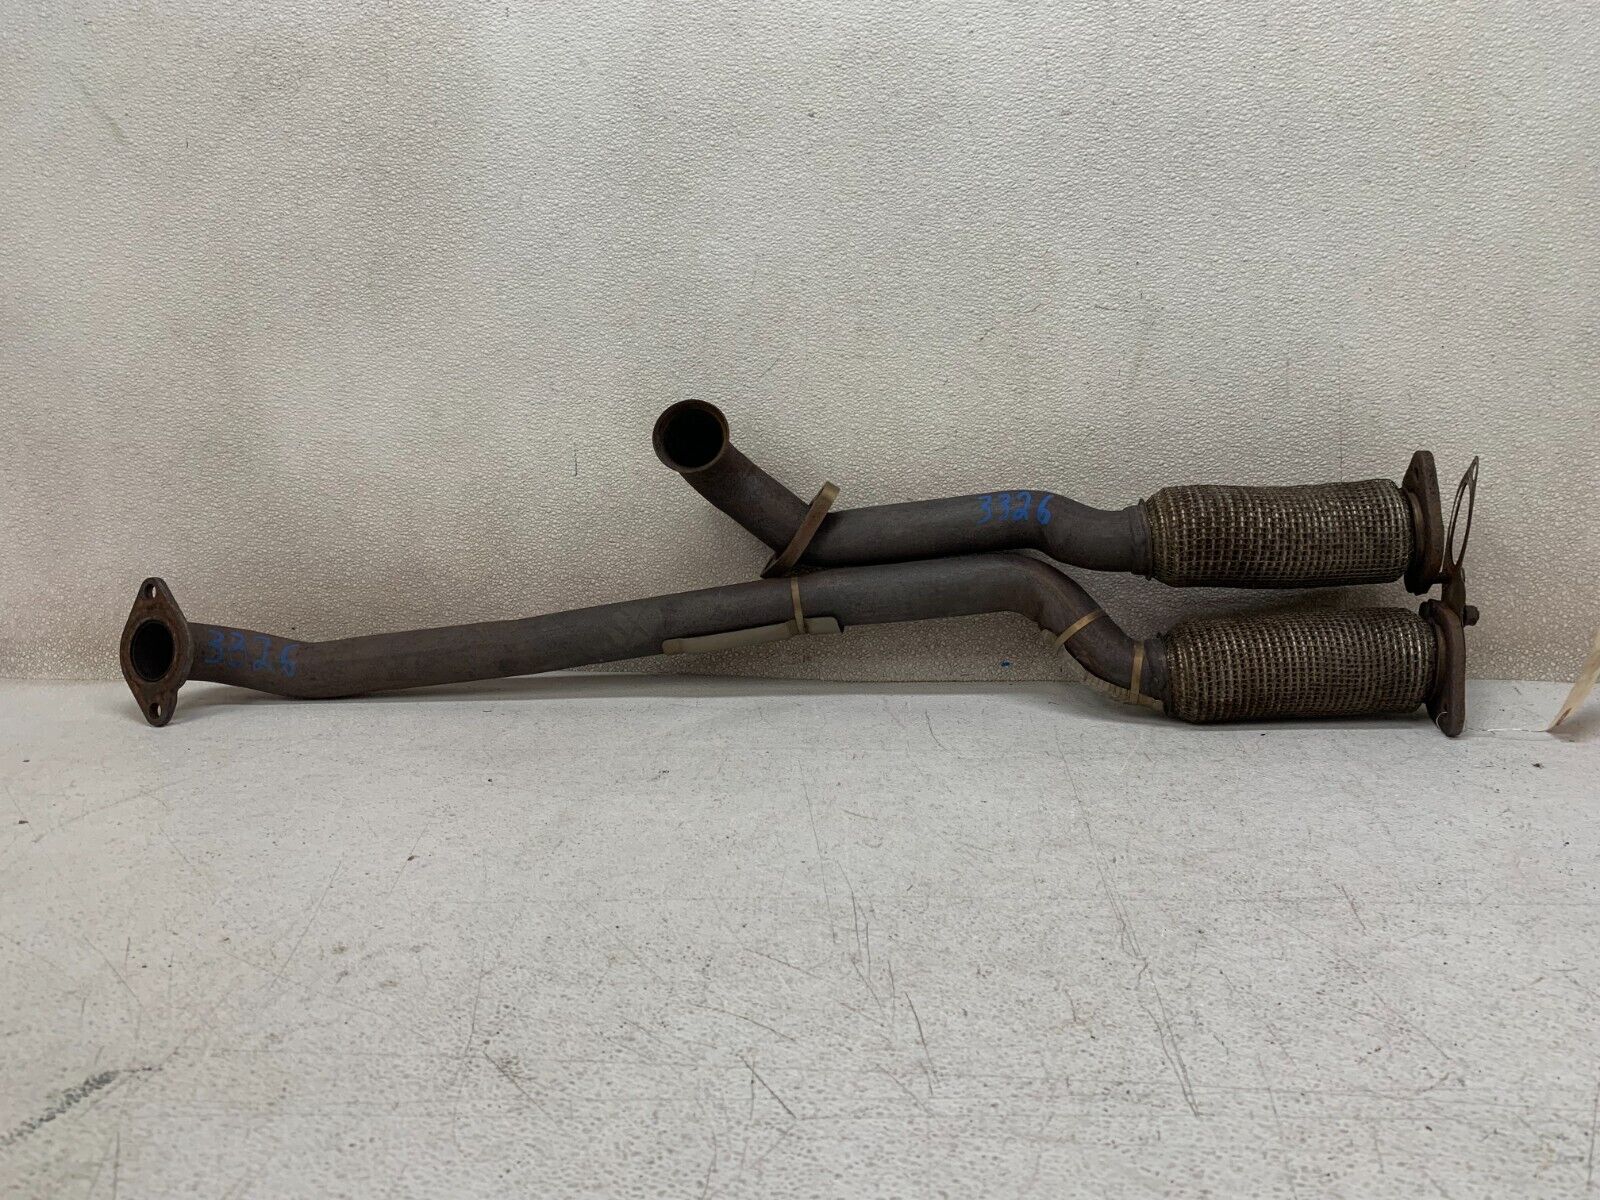 13-16 LINCOLN MKZ 3.7L EXHAUST SYSTEM FRONT DOWN PIPE DOWNPIPE, LOT3326